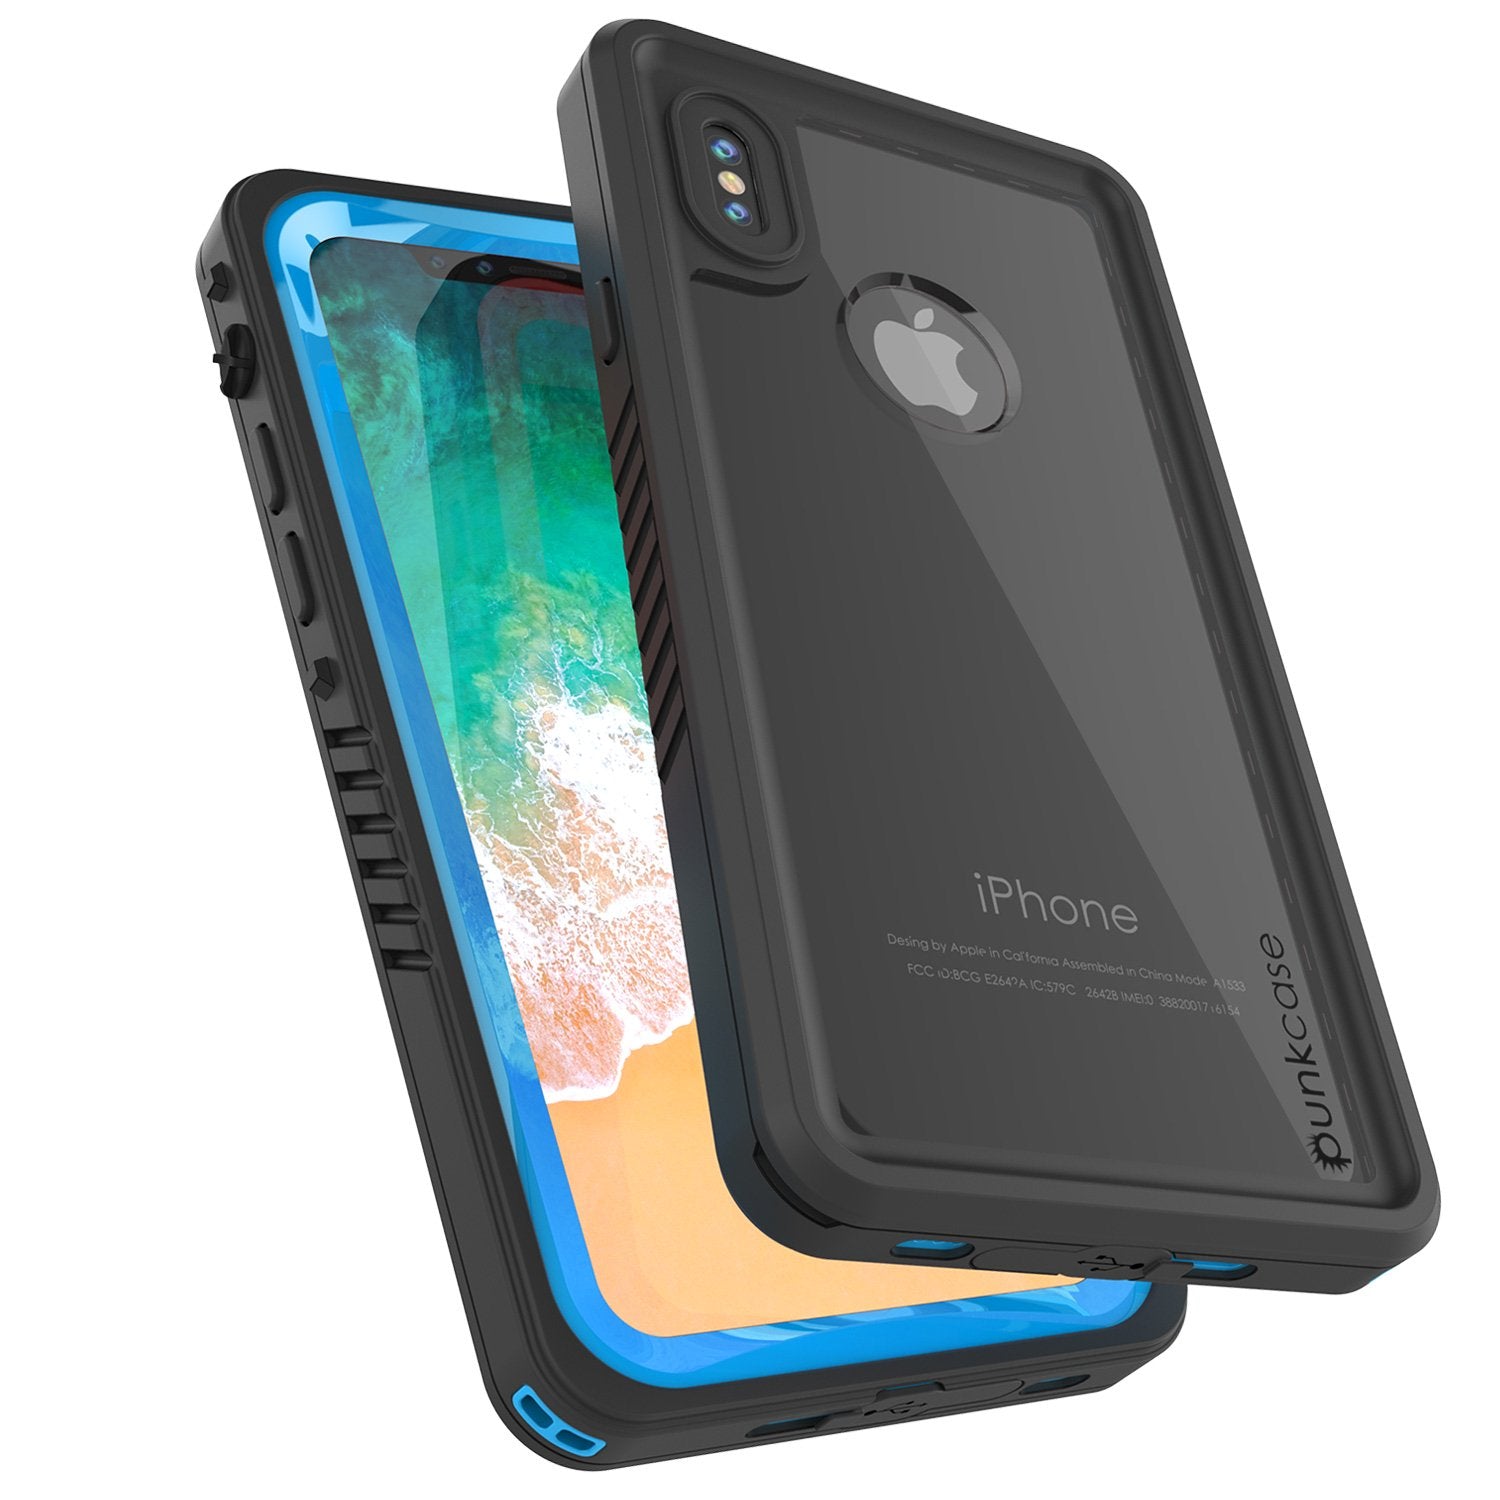 iPhone X Case, Punkcase [Extreme Series] [Slim Fit] [IP68 Certified] [Shockproof] [Snowproof] [Dirproof] Armor Cover W/ Built In Screen Protector for Apple iPhone 10 [LIGHT BLUE]